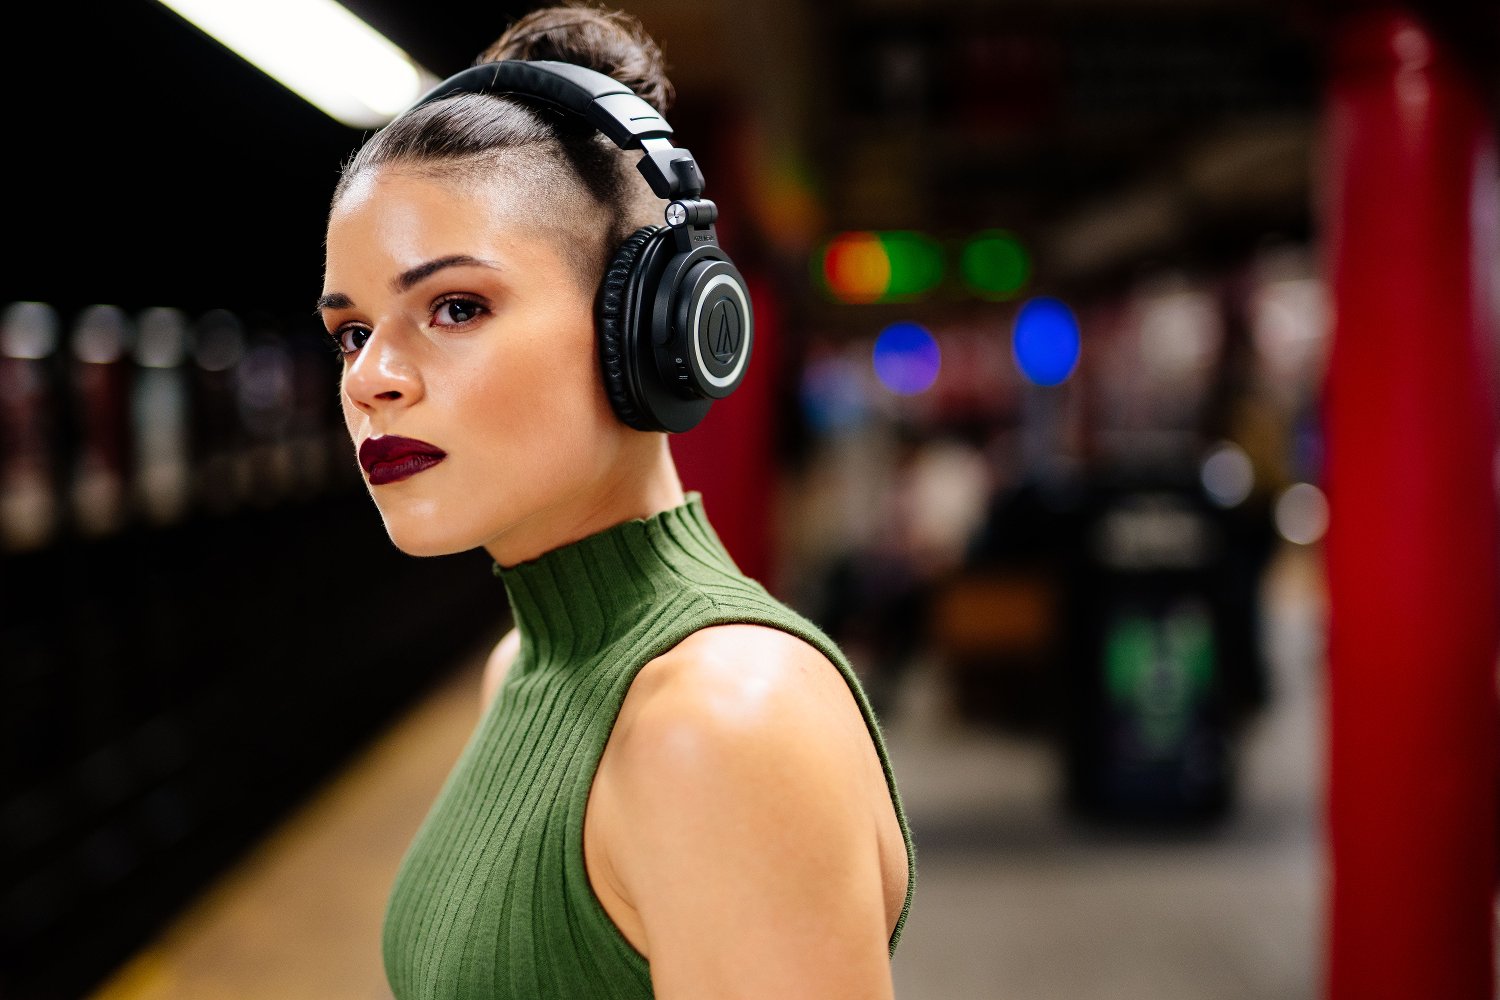 From Studio-Grade Headphones to Travel Gift Cards: 6 Items We’re Hankering After This Festive Season